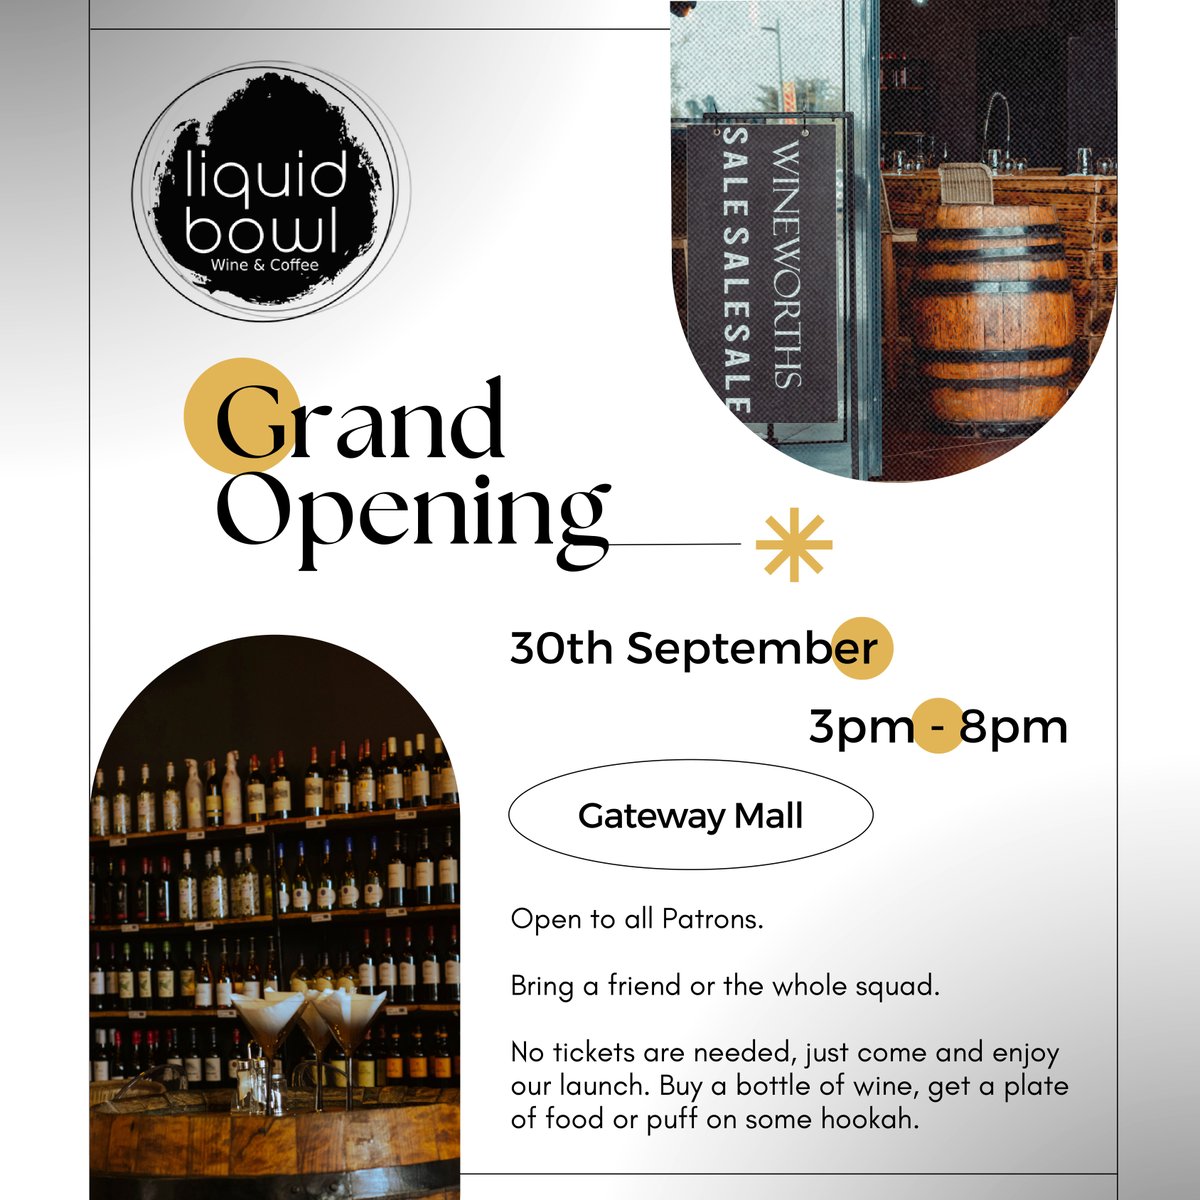 Join us for an unforgettable evening at the grand launch of Liquid Bowl Wine Bar! Discover a world of exquisite wines and delectable meals. Raise your glass to the taste of elegance!

#WineLoversUnite #SipAndSavor #WineExtravaganza #Wineworths #WineBarDiscoveries